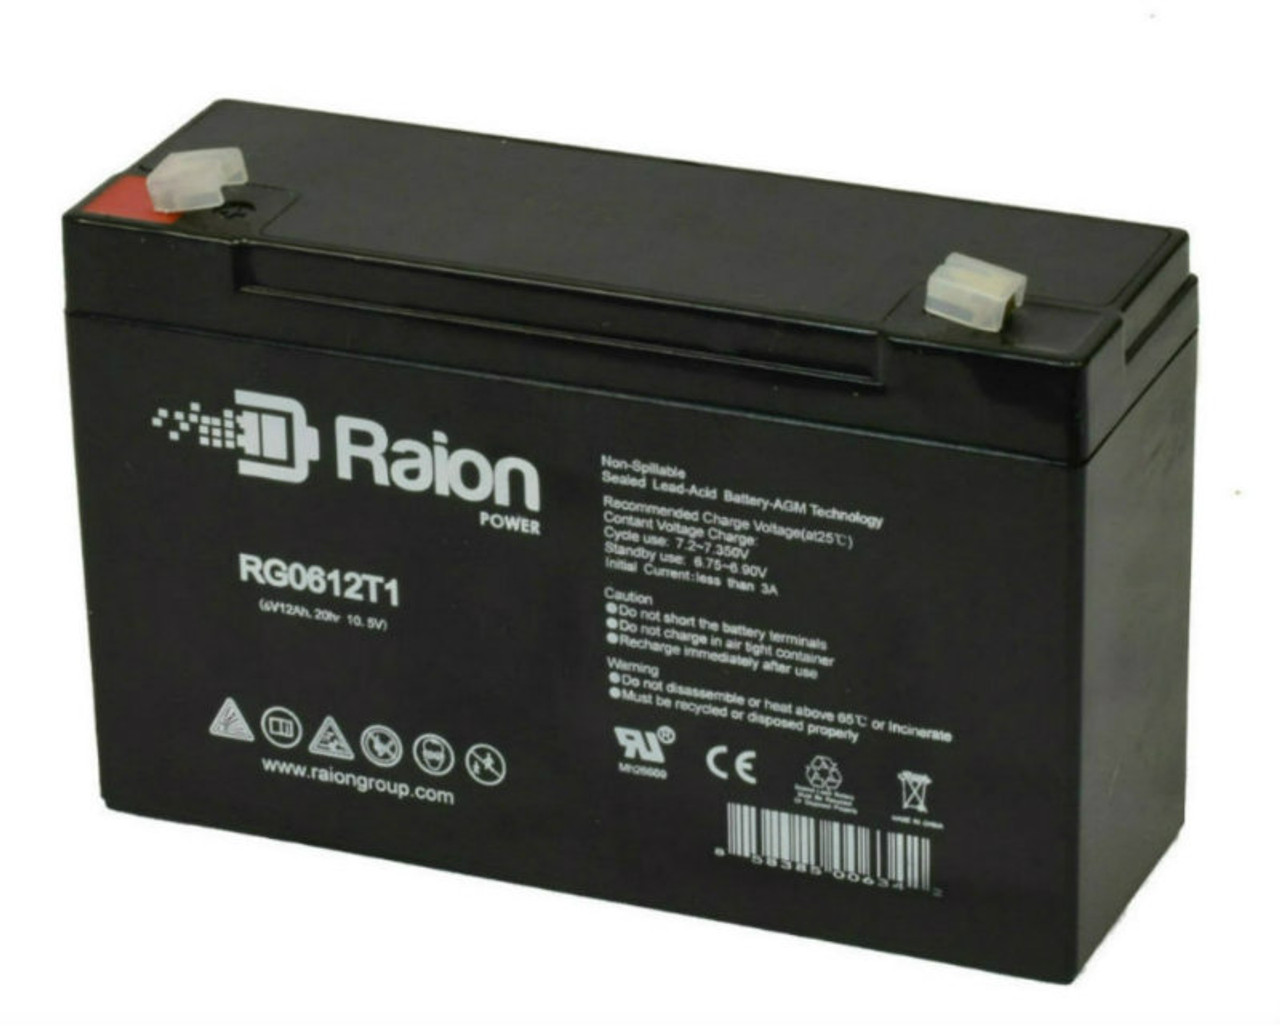 Raion Power RG06120T1 Replacement Battery for Leoch LP6-12